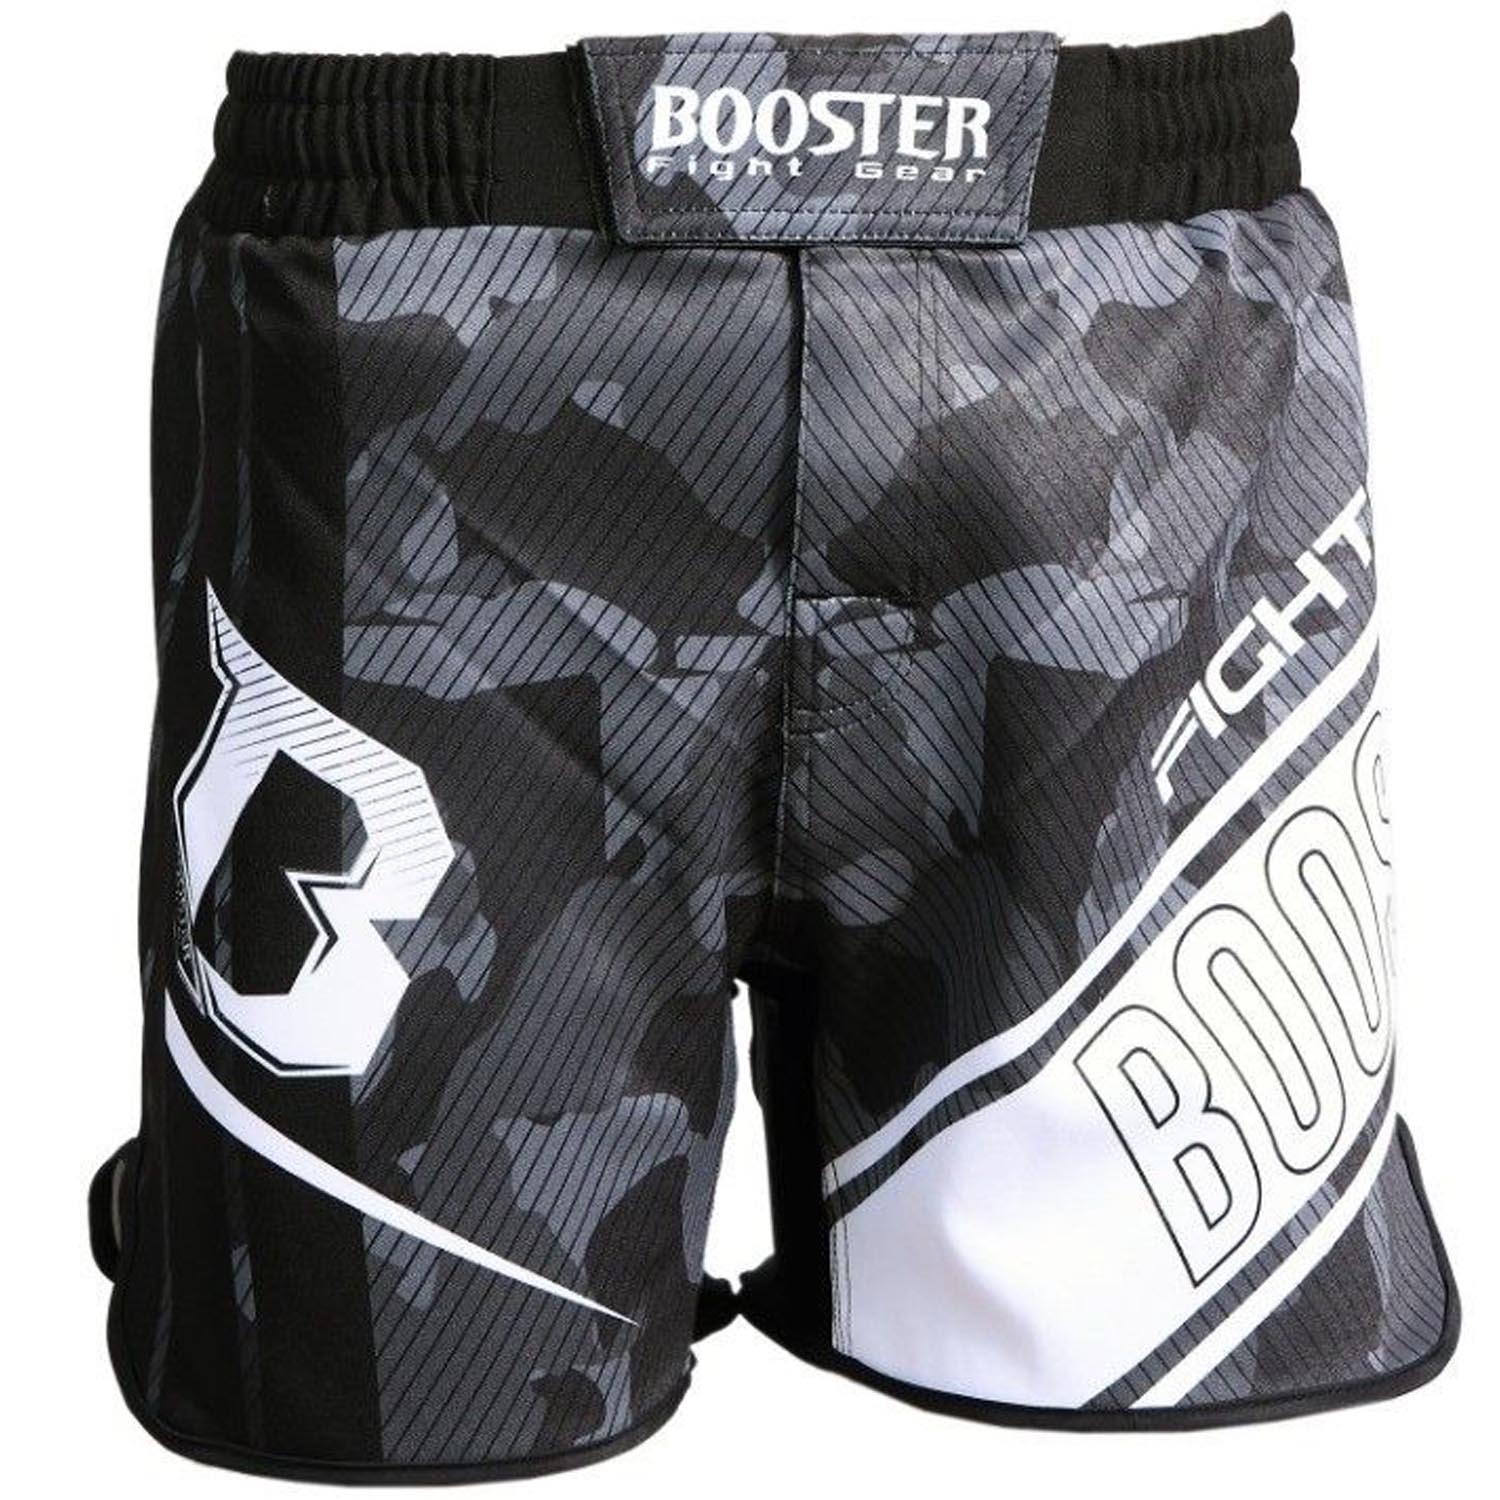 Booster MMA Fight Shorts, B Force 2, black-camo, S